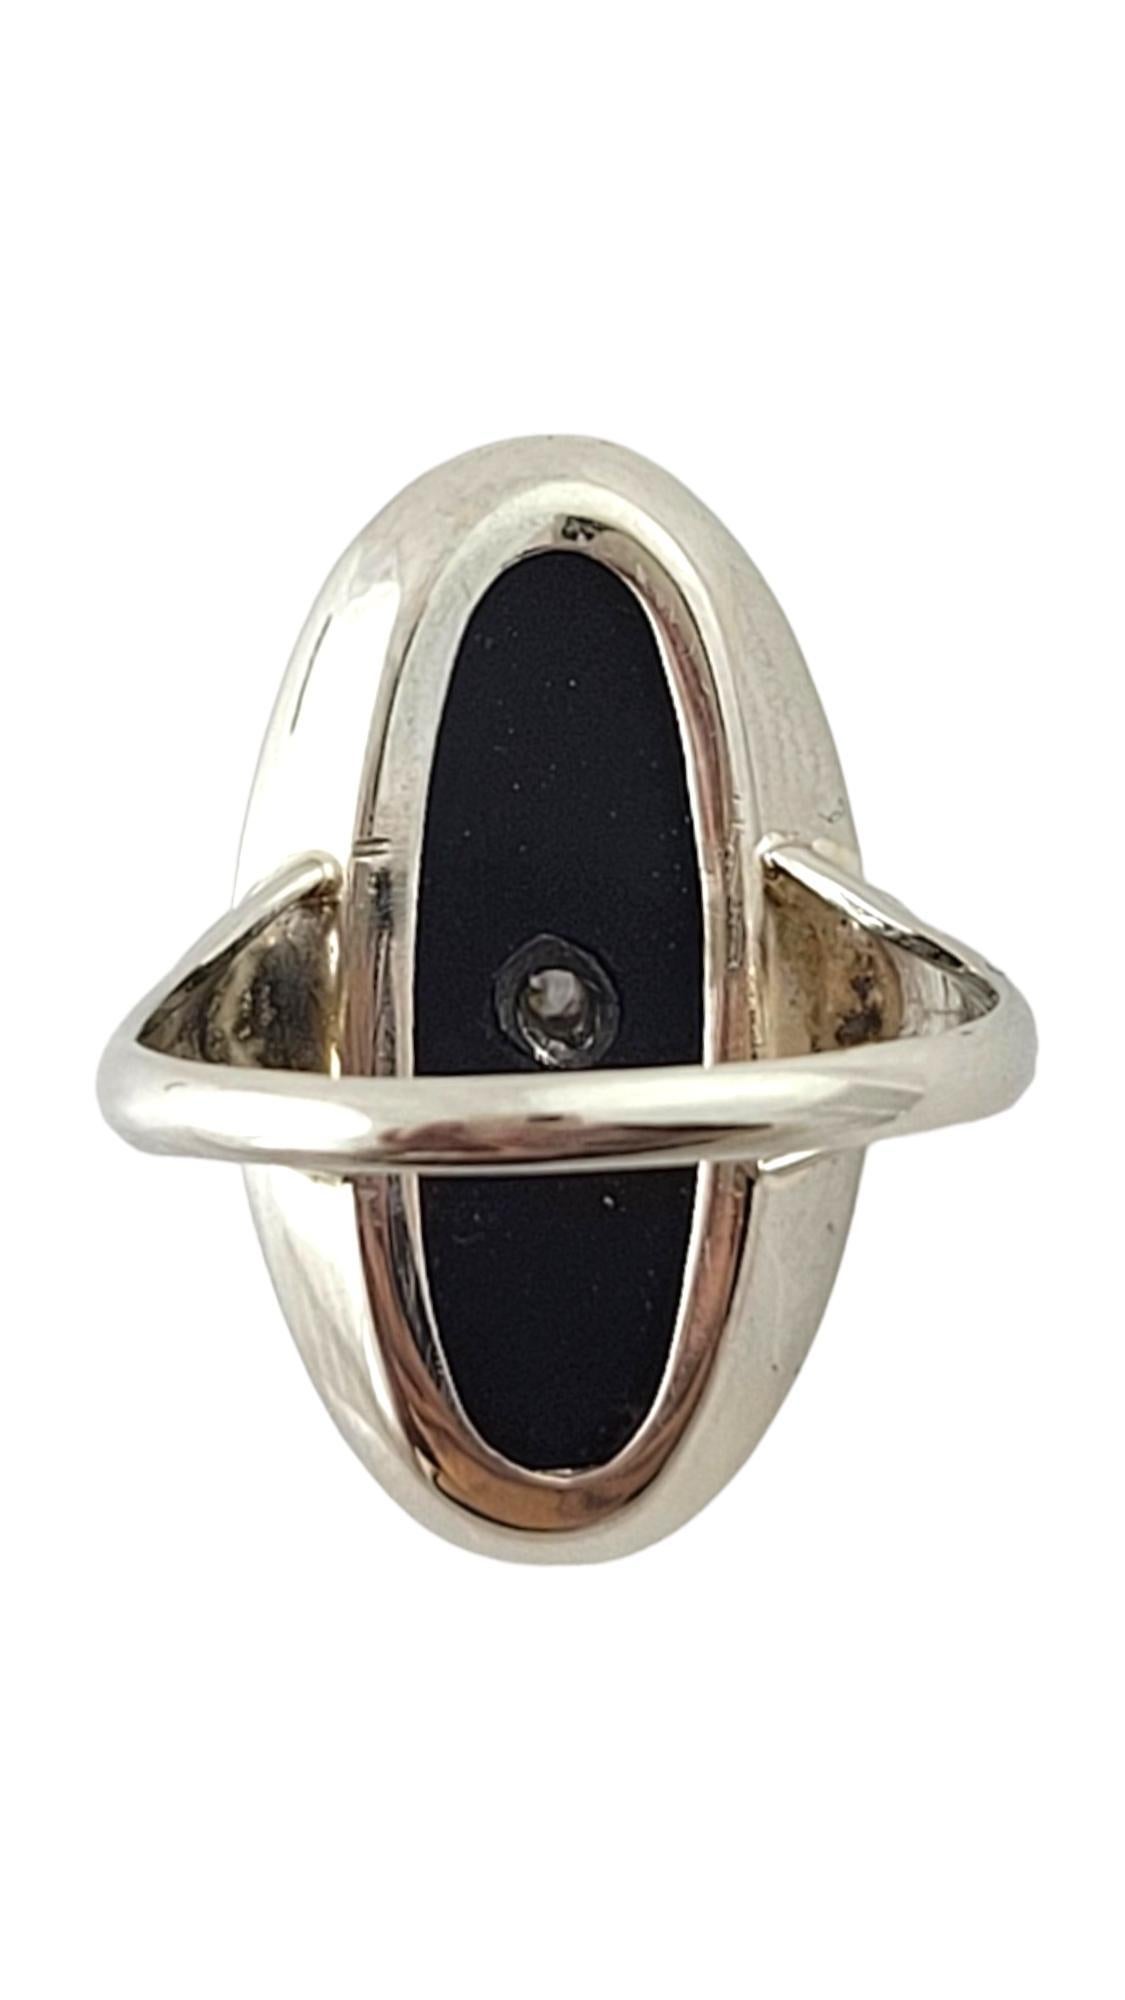 14K White Gold Black Onyx Diamond Ring Size 4.75-5 #16945 In Good Condition For Sale In Washington Depot, CT